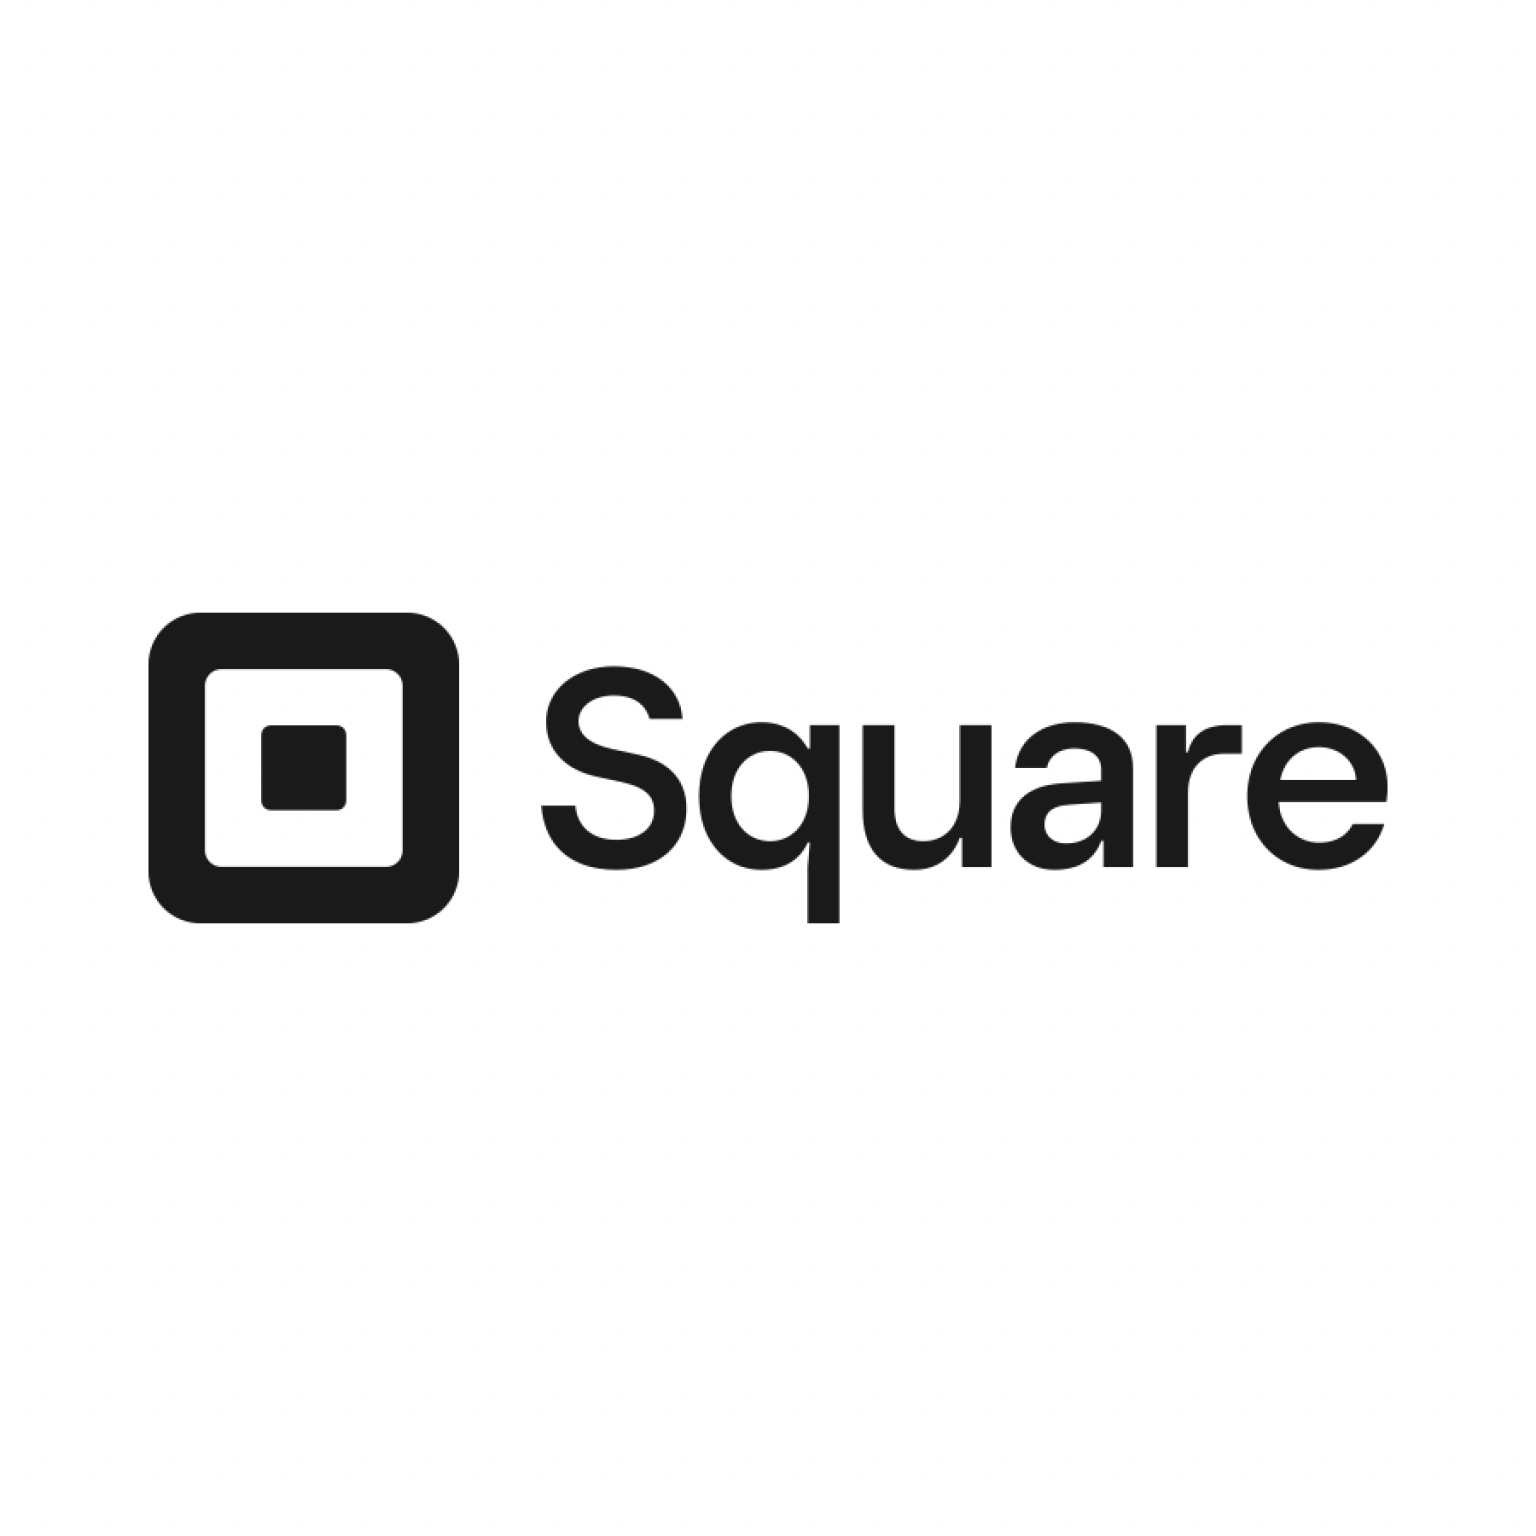 Square is changing its name to Block, effective December 10, and renaming Square Crypto to Spiral, as its business shifts toward technologies like blockchain (Kate Rooney/CNBC)